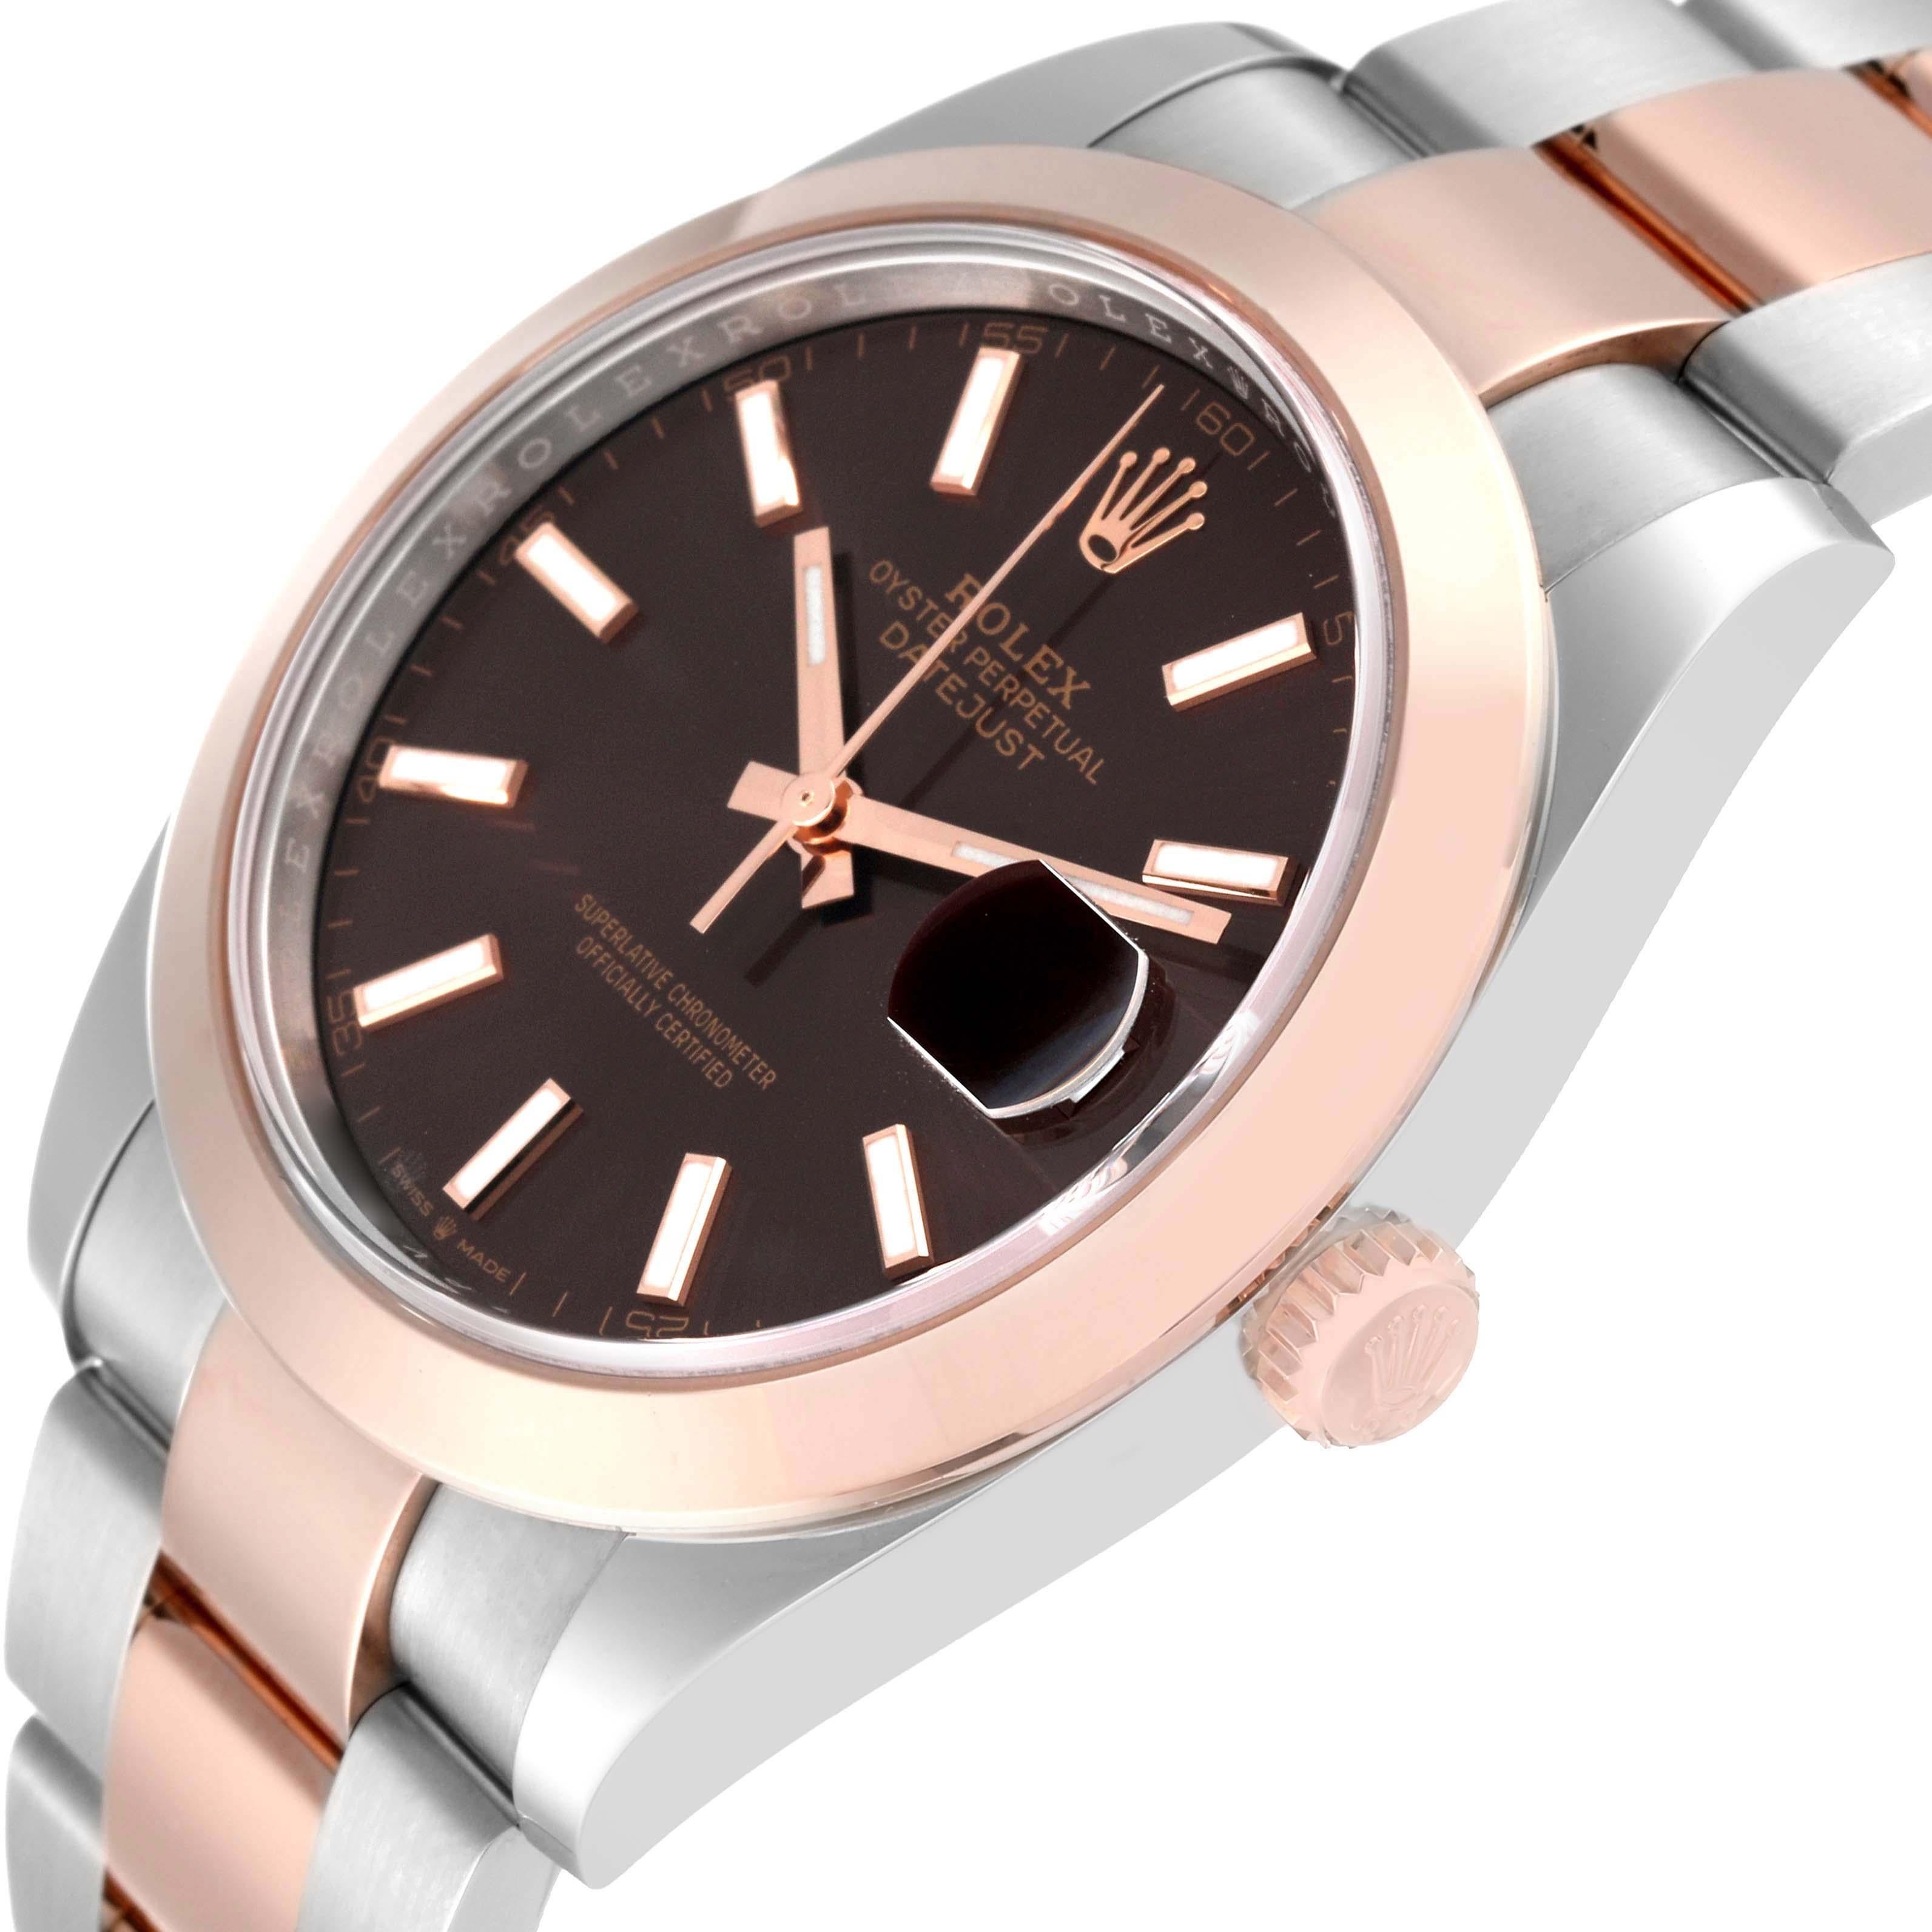 Rolex Datejust 41 Steel Rose Gold Brown Dial Mens Watch 126301 Box Card In Excellent Condition For Sale In Atlanta, GA